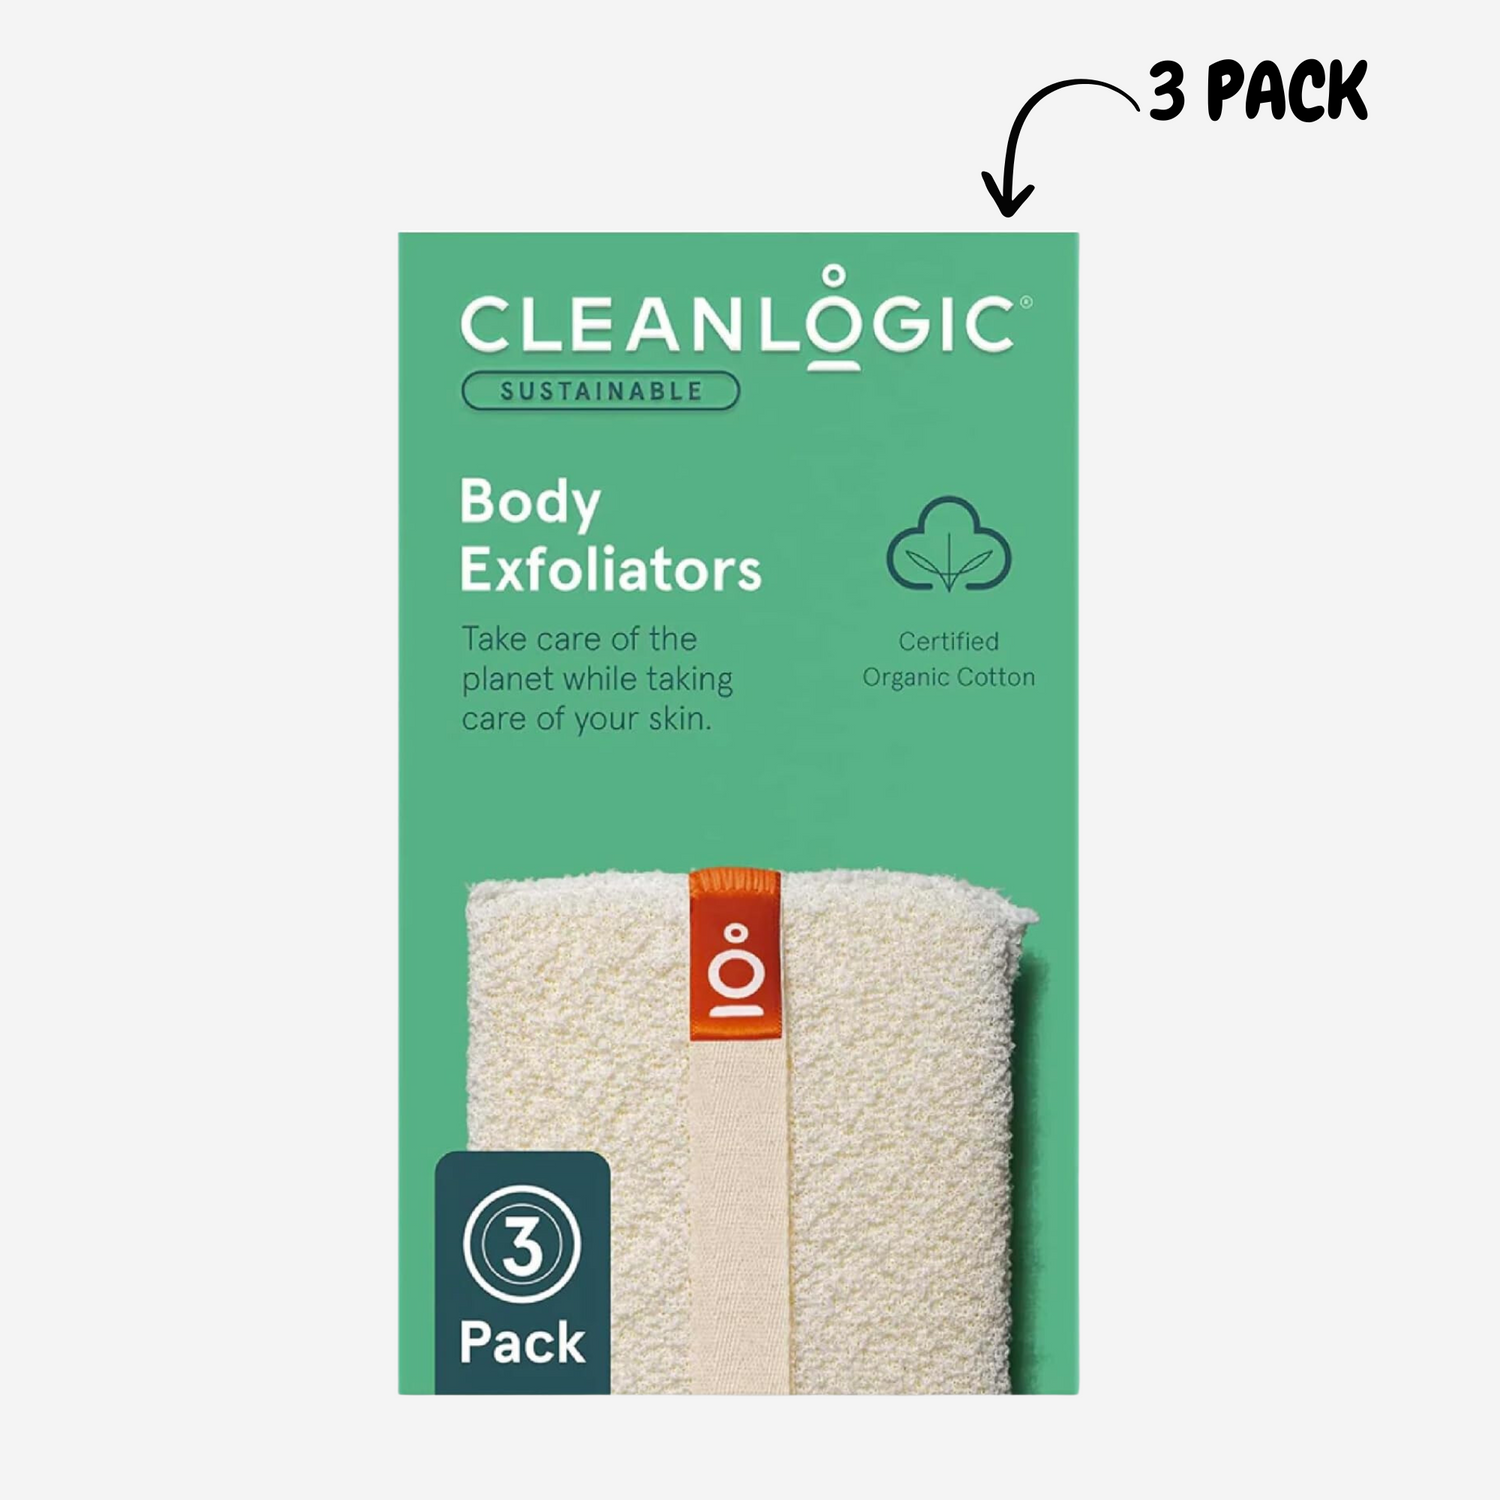 Cleanlogic Organic Cotton Exfoliating Body Scrubber, Reusable Exfoliator Tool for Smooth and Softer Skin